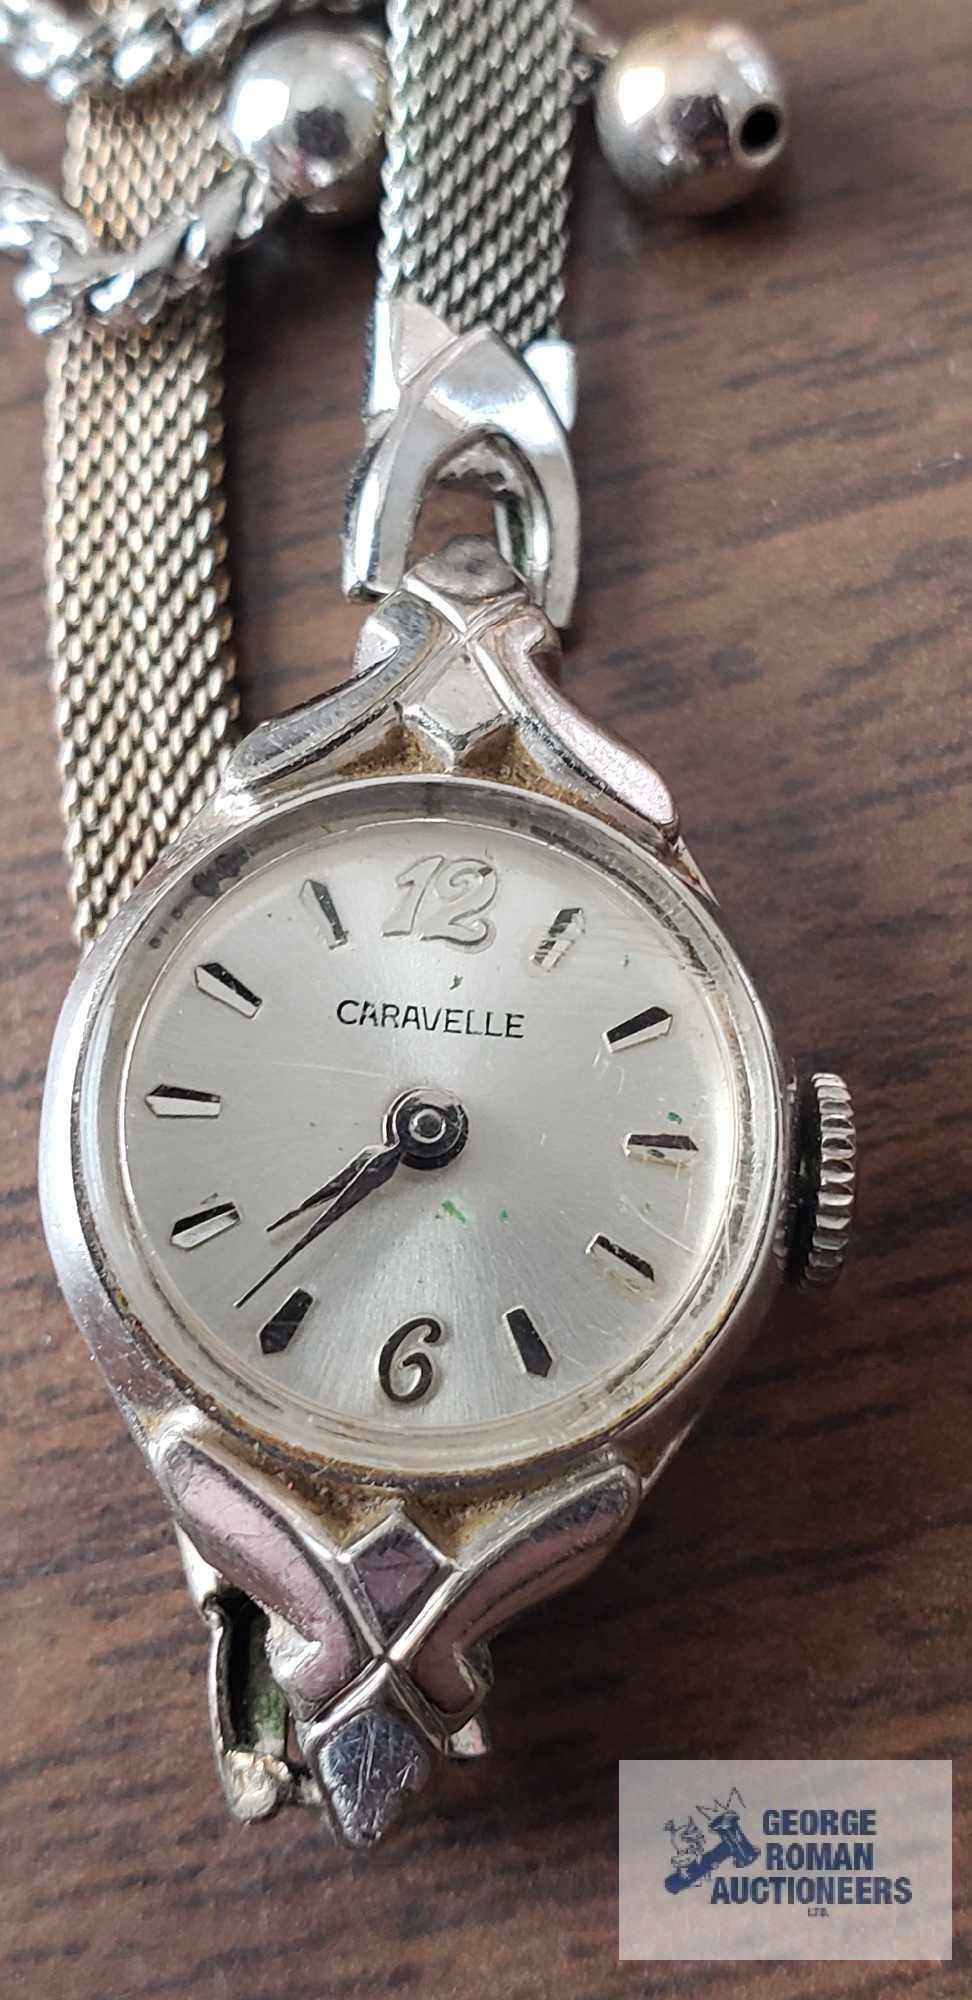 Two Caravelle watches